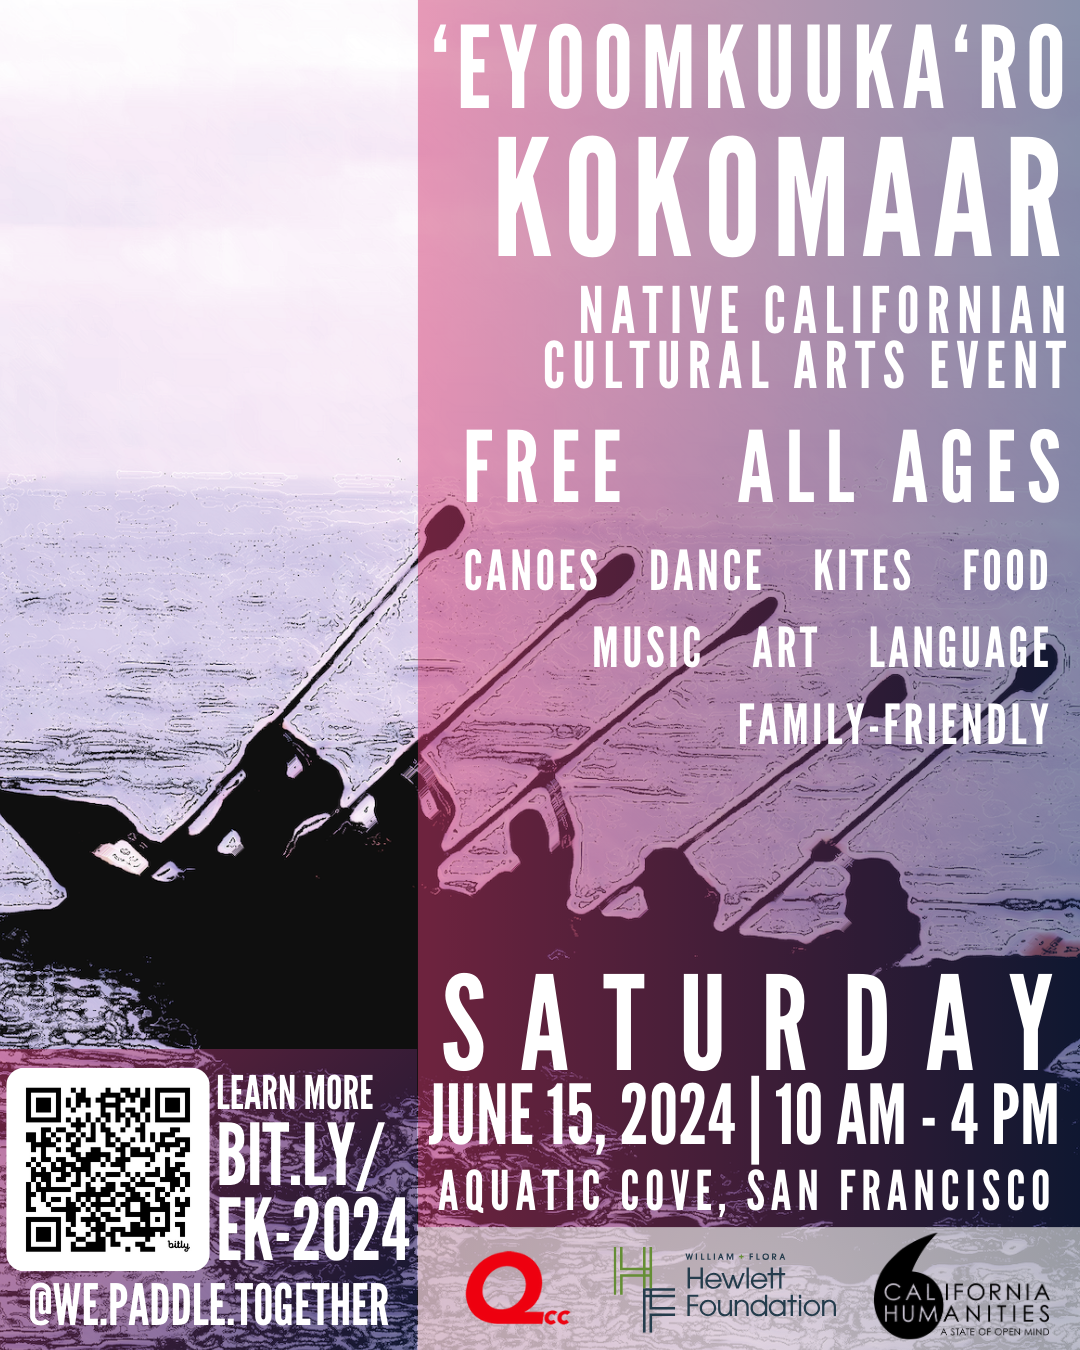 Flyer for Eyoomkuuka-ro Kokomaar / We Paddle Together, Free for All Ages. Image of people paddling in a long canoe in the background with date Saturday, June 15